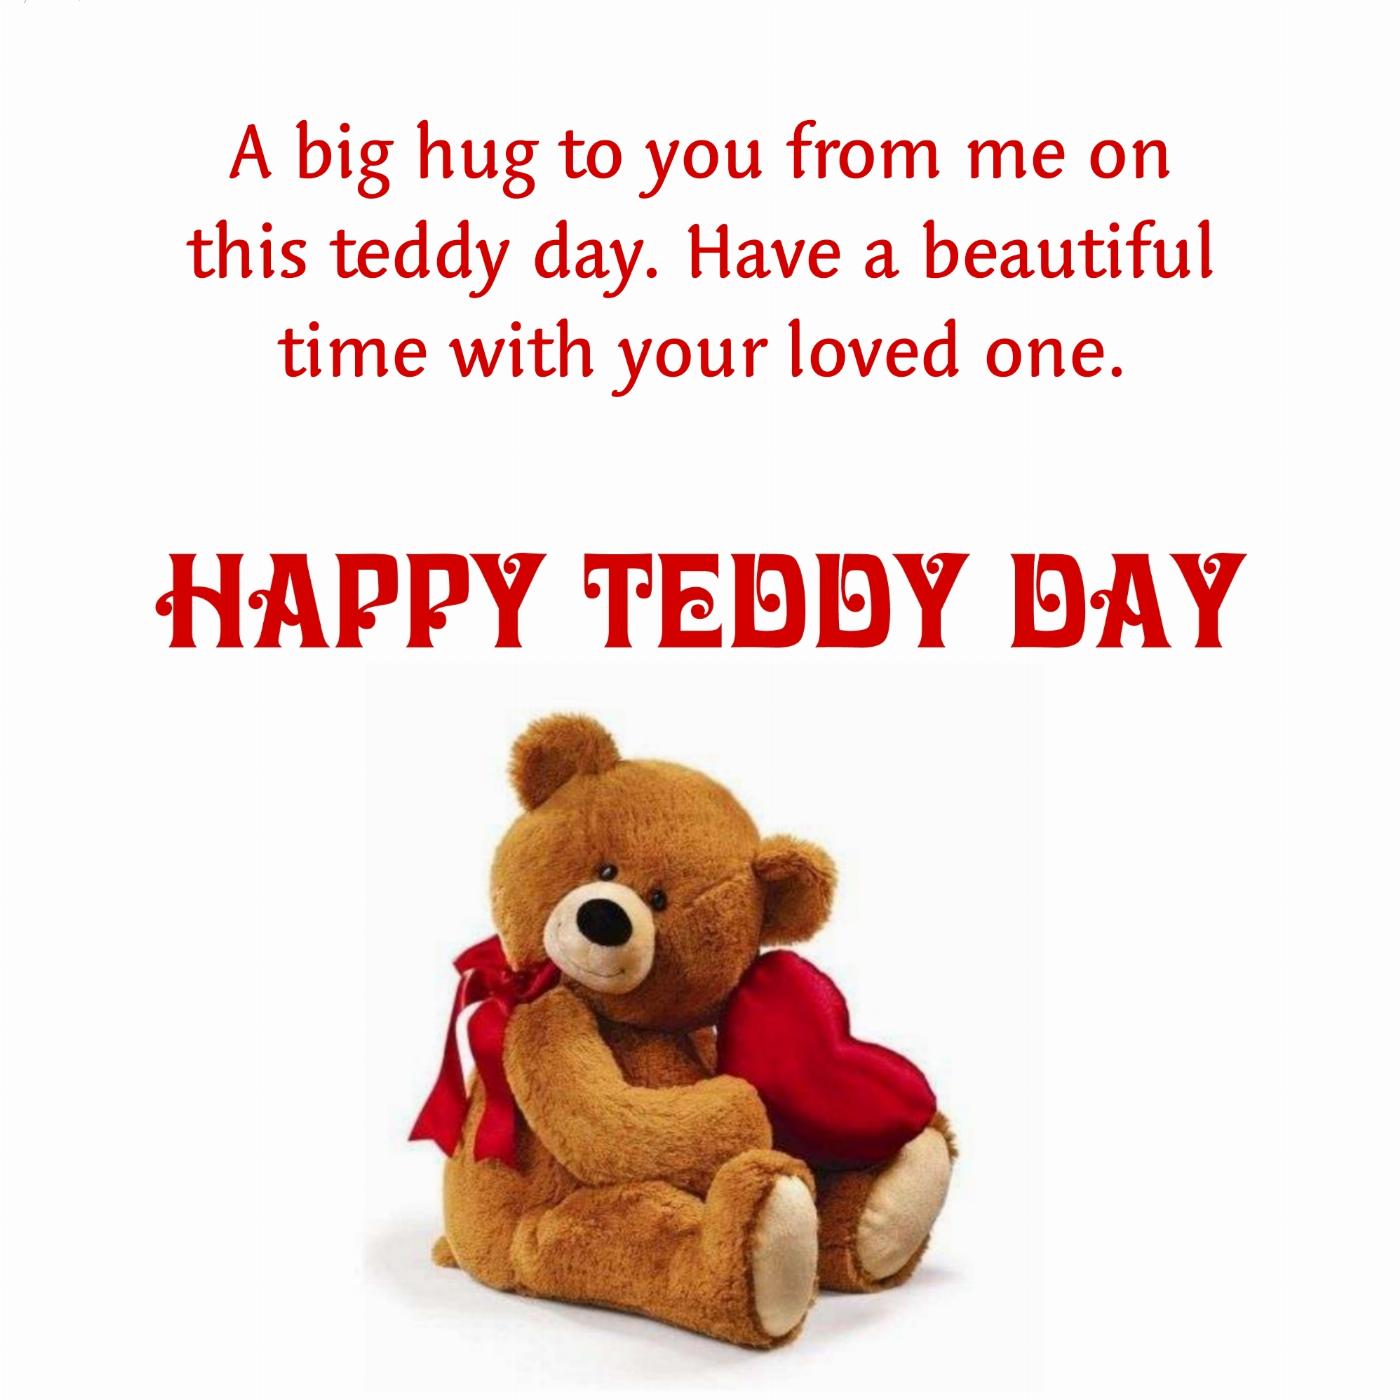 A big hug to you from me on this teddy day